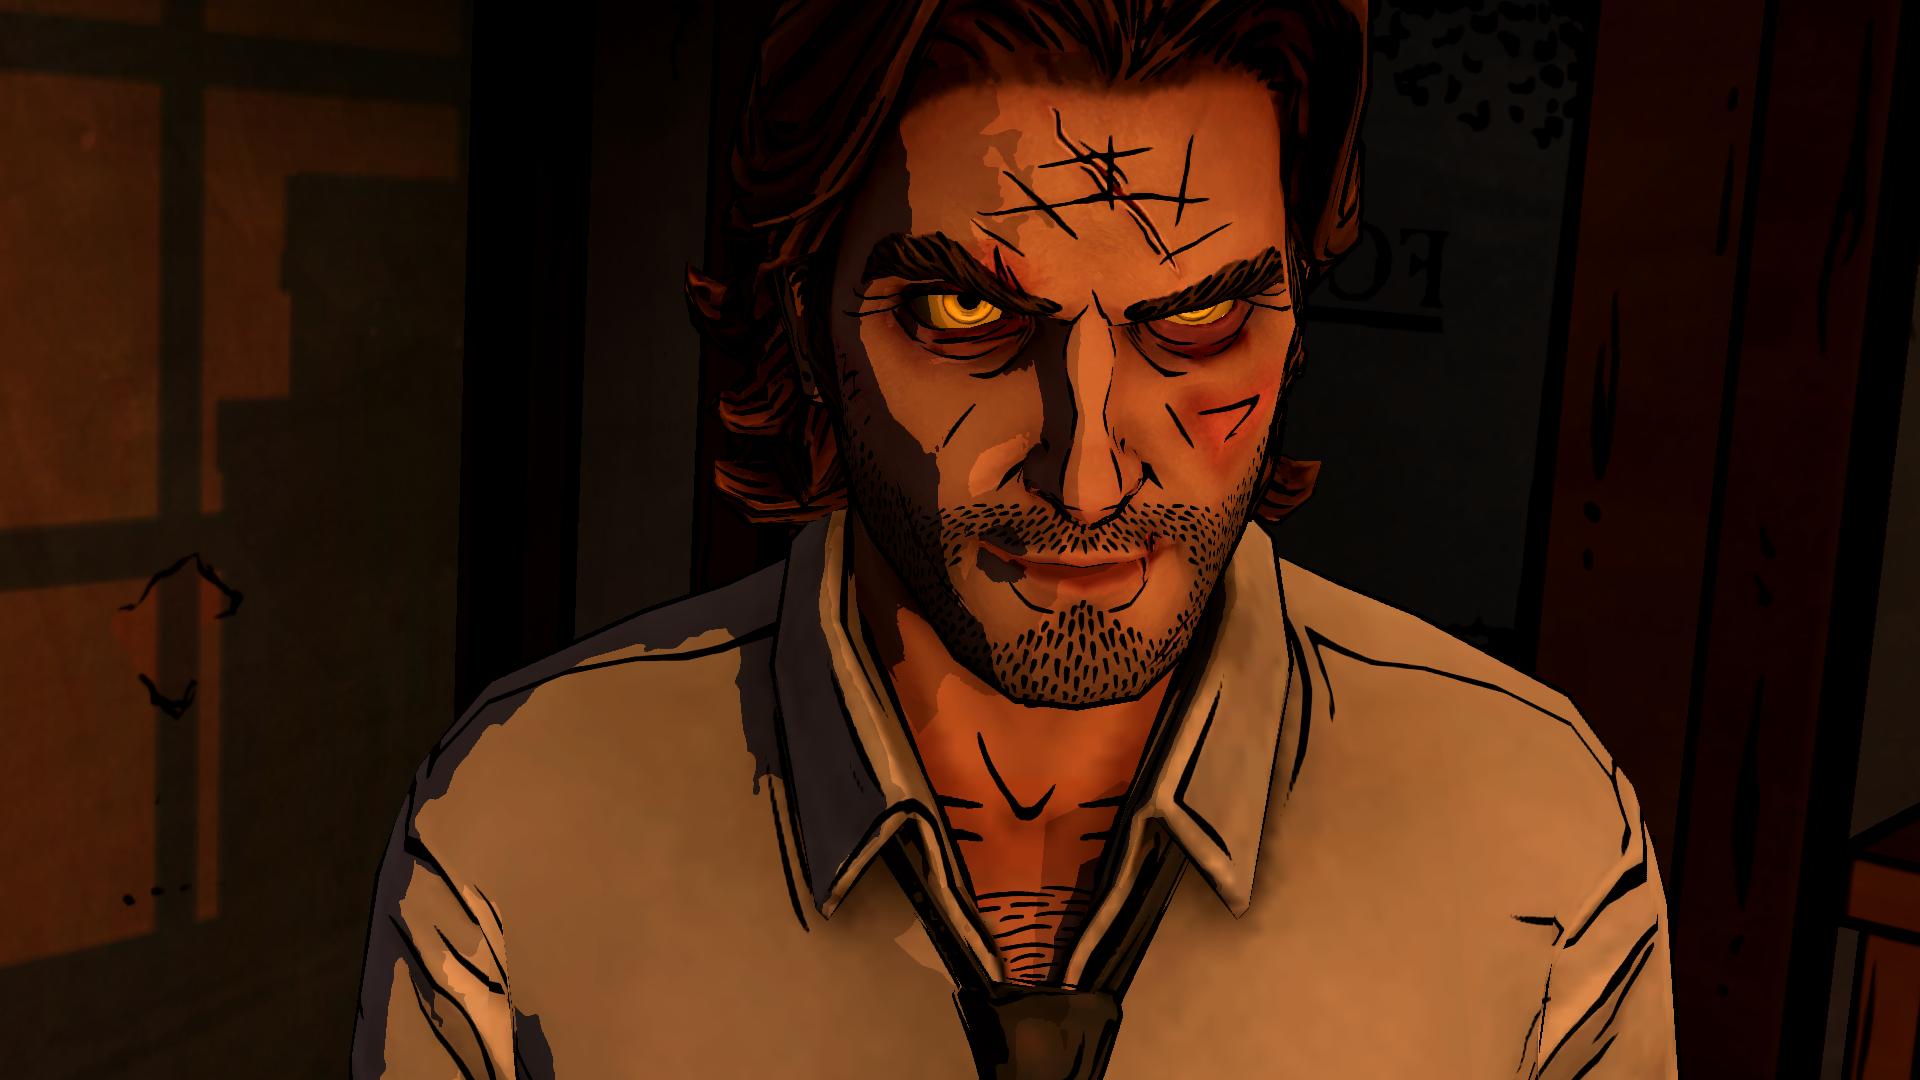 The Wolf Among Us instal the new version for apple